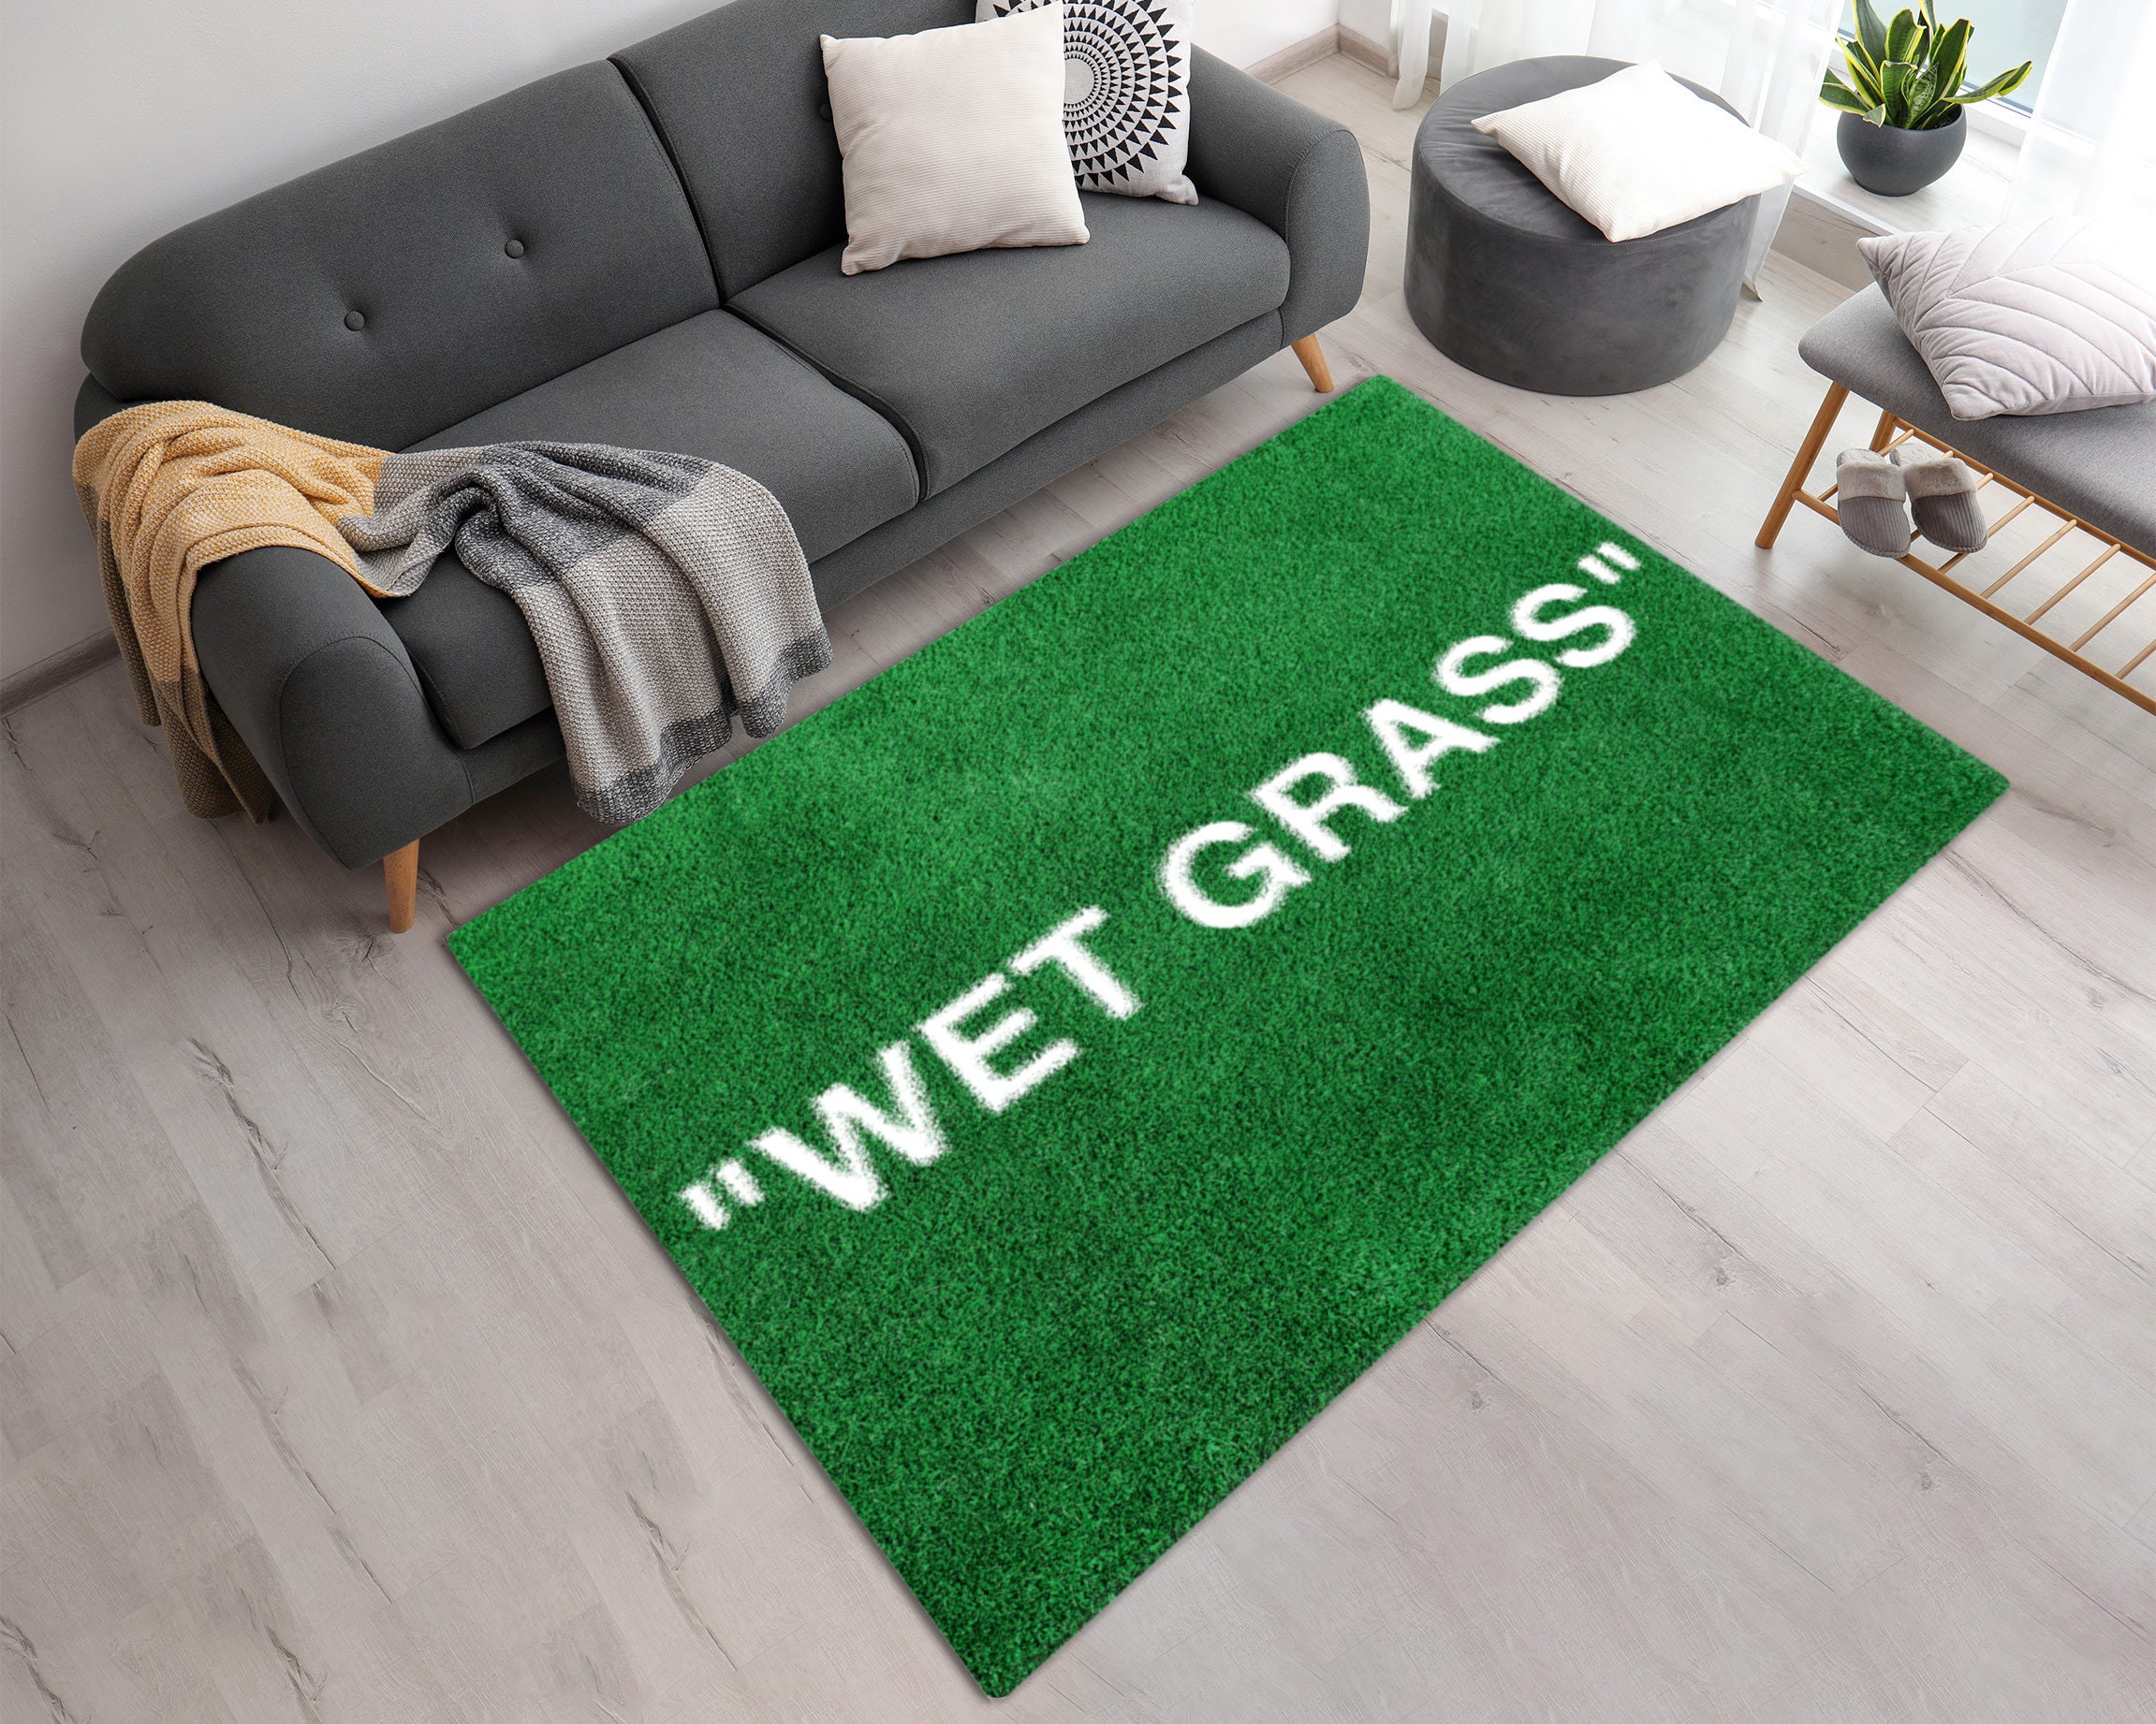 Vibrant High Quality Green Grass Area Rug Machine Washable 